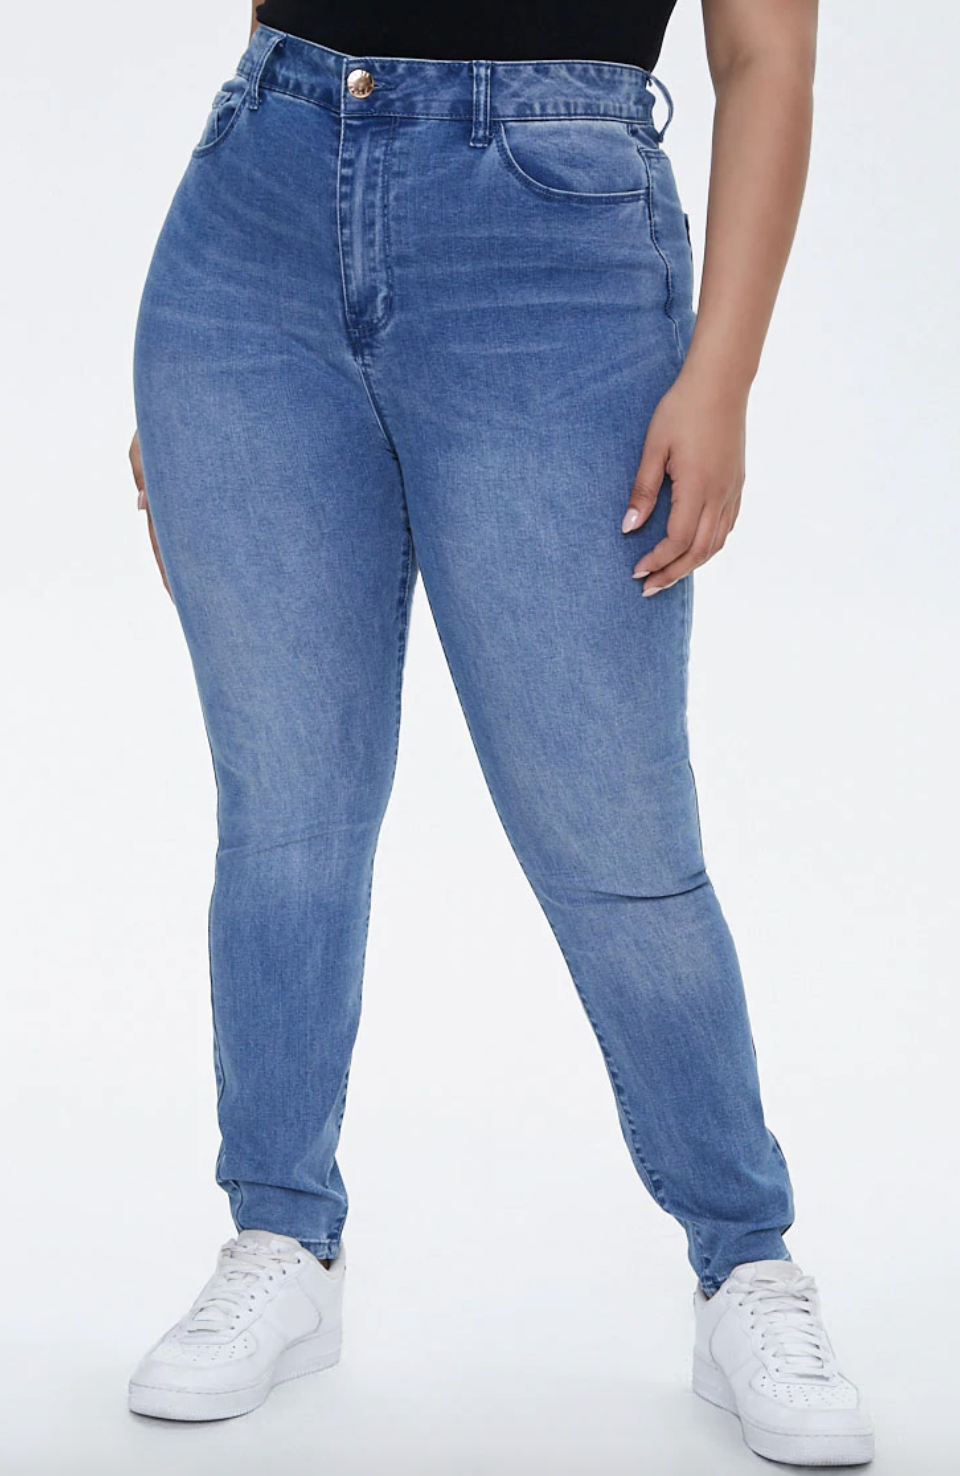 best jeans brand for curvy